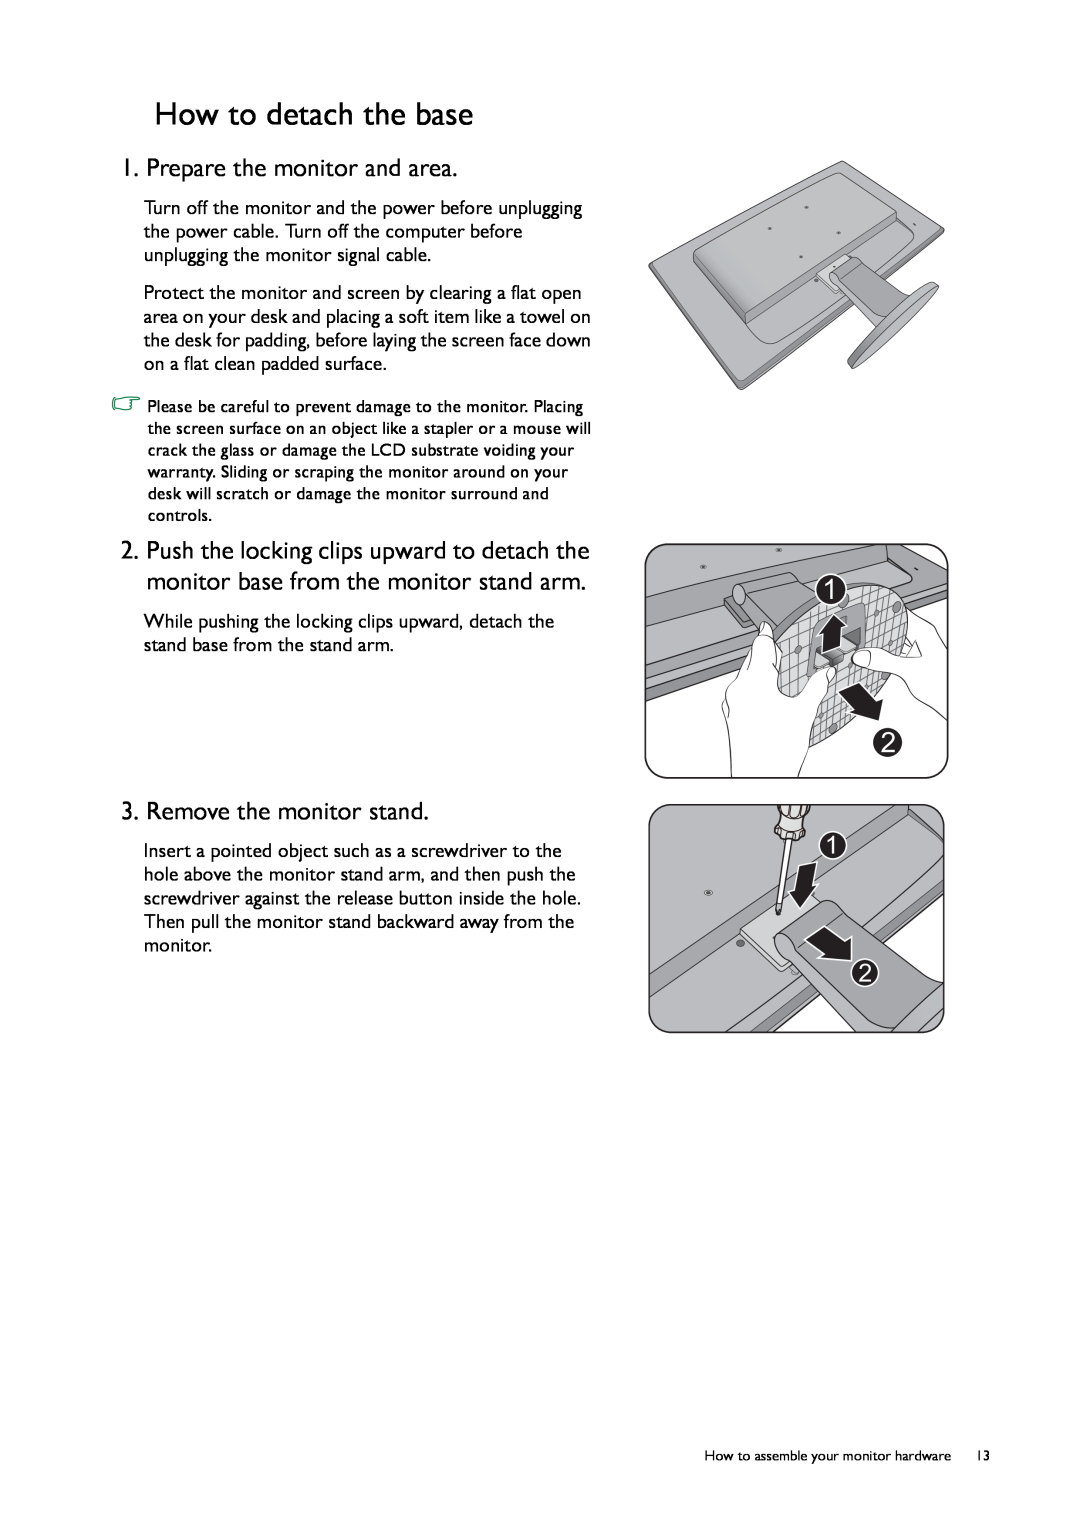 BenQ GL50, G50 user manual How to detach the base, Prepare the monitor and area, Remove the monitor stand 